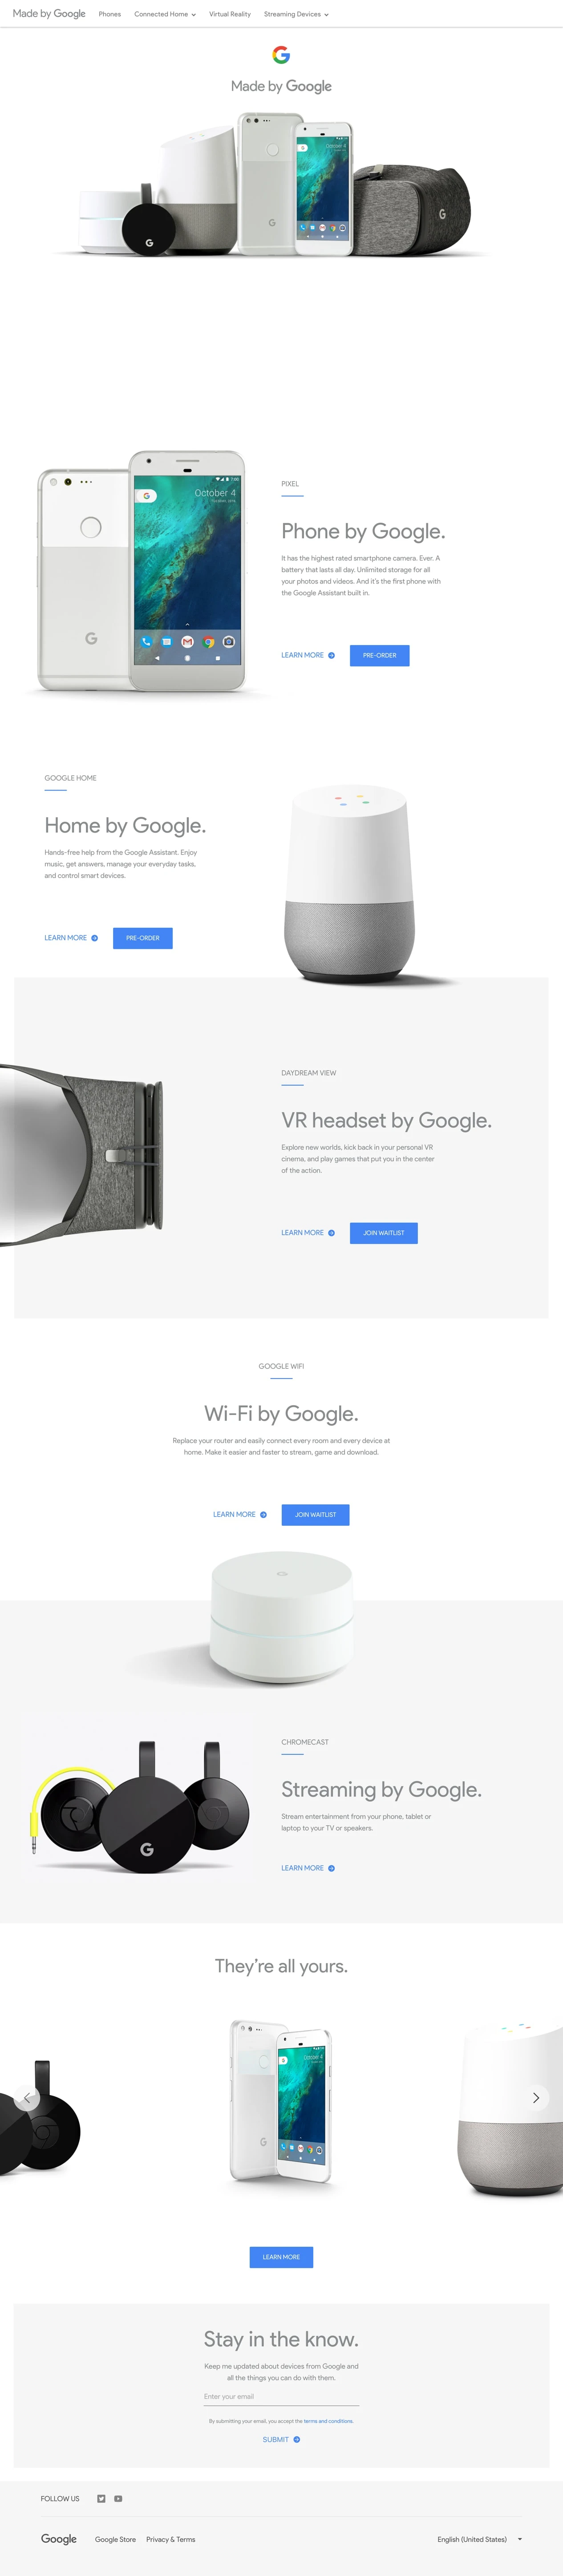 Made by Google Landing Page Example: Meet the newest members of the Google family.